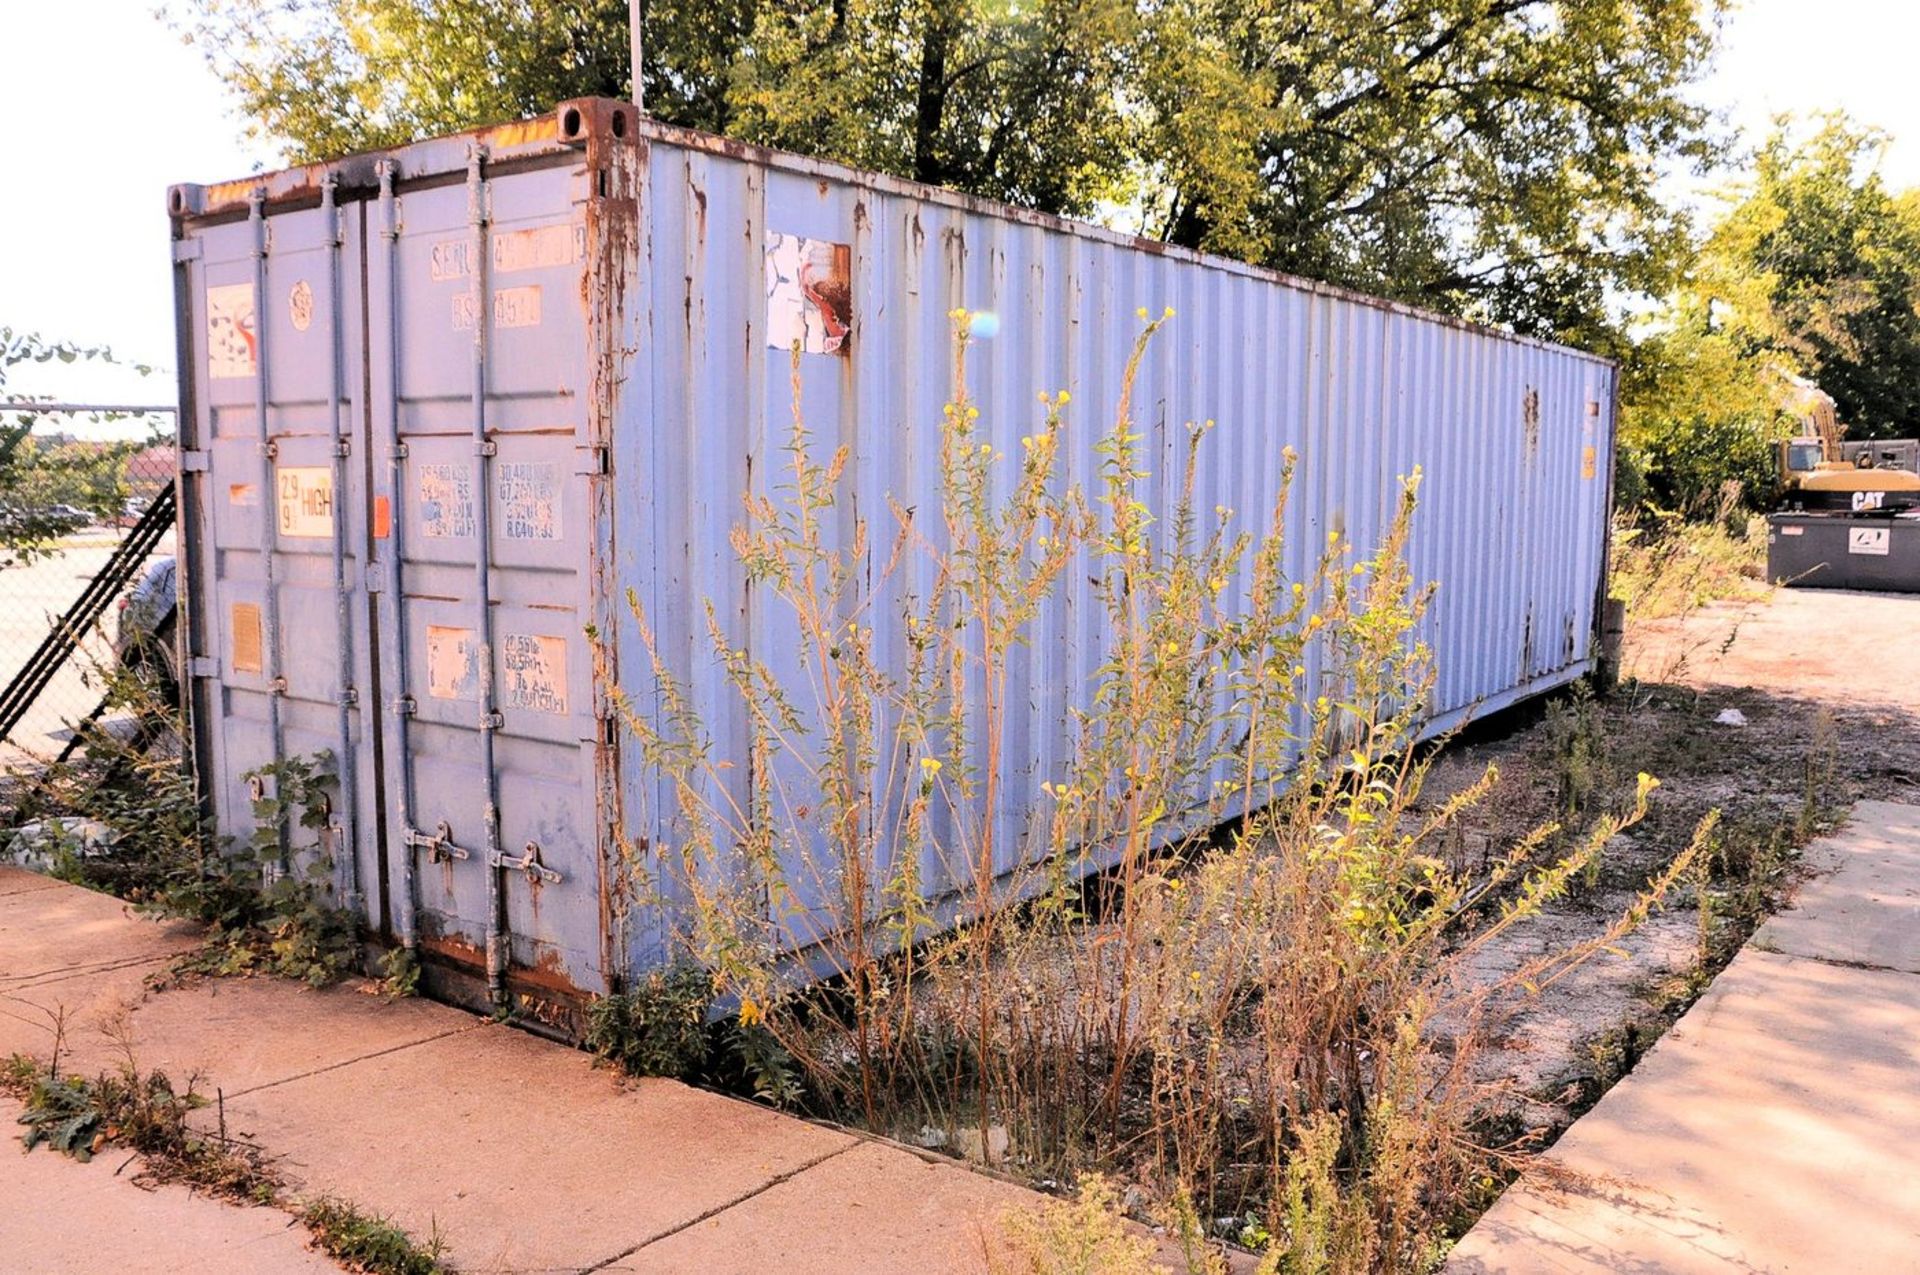 40 ft. Model ROK/010-KR Type HSM-731 Shipping/Storage Container, S/N: HSMF-96420 (1991); 40 ft. long